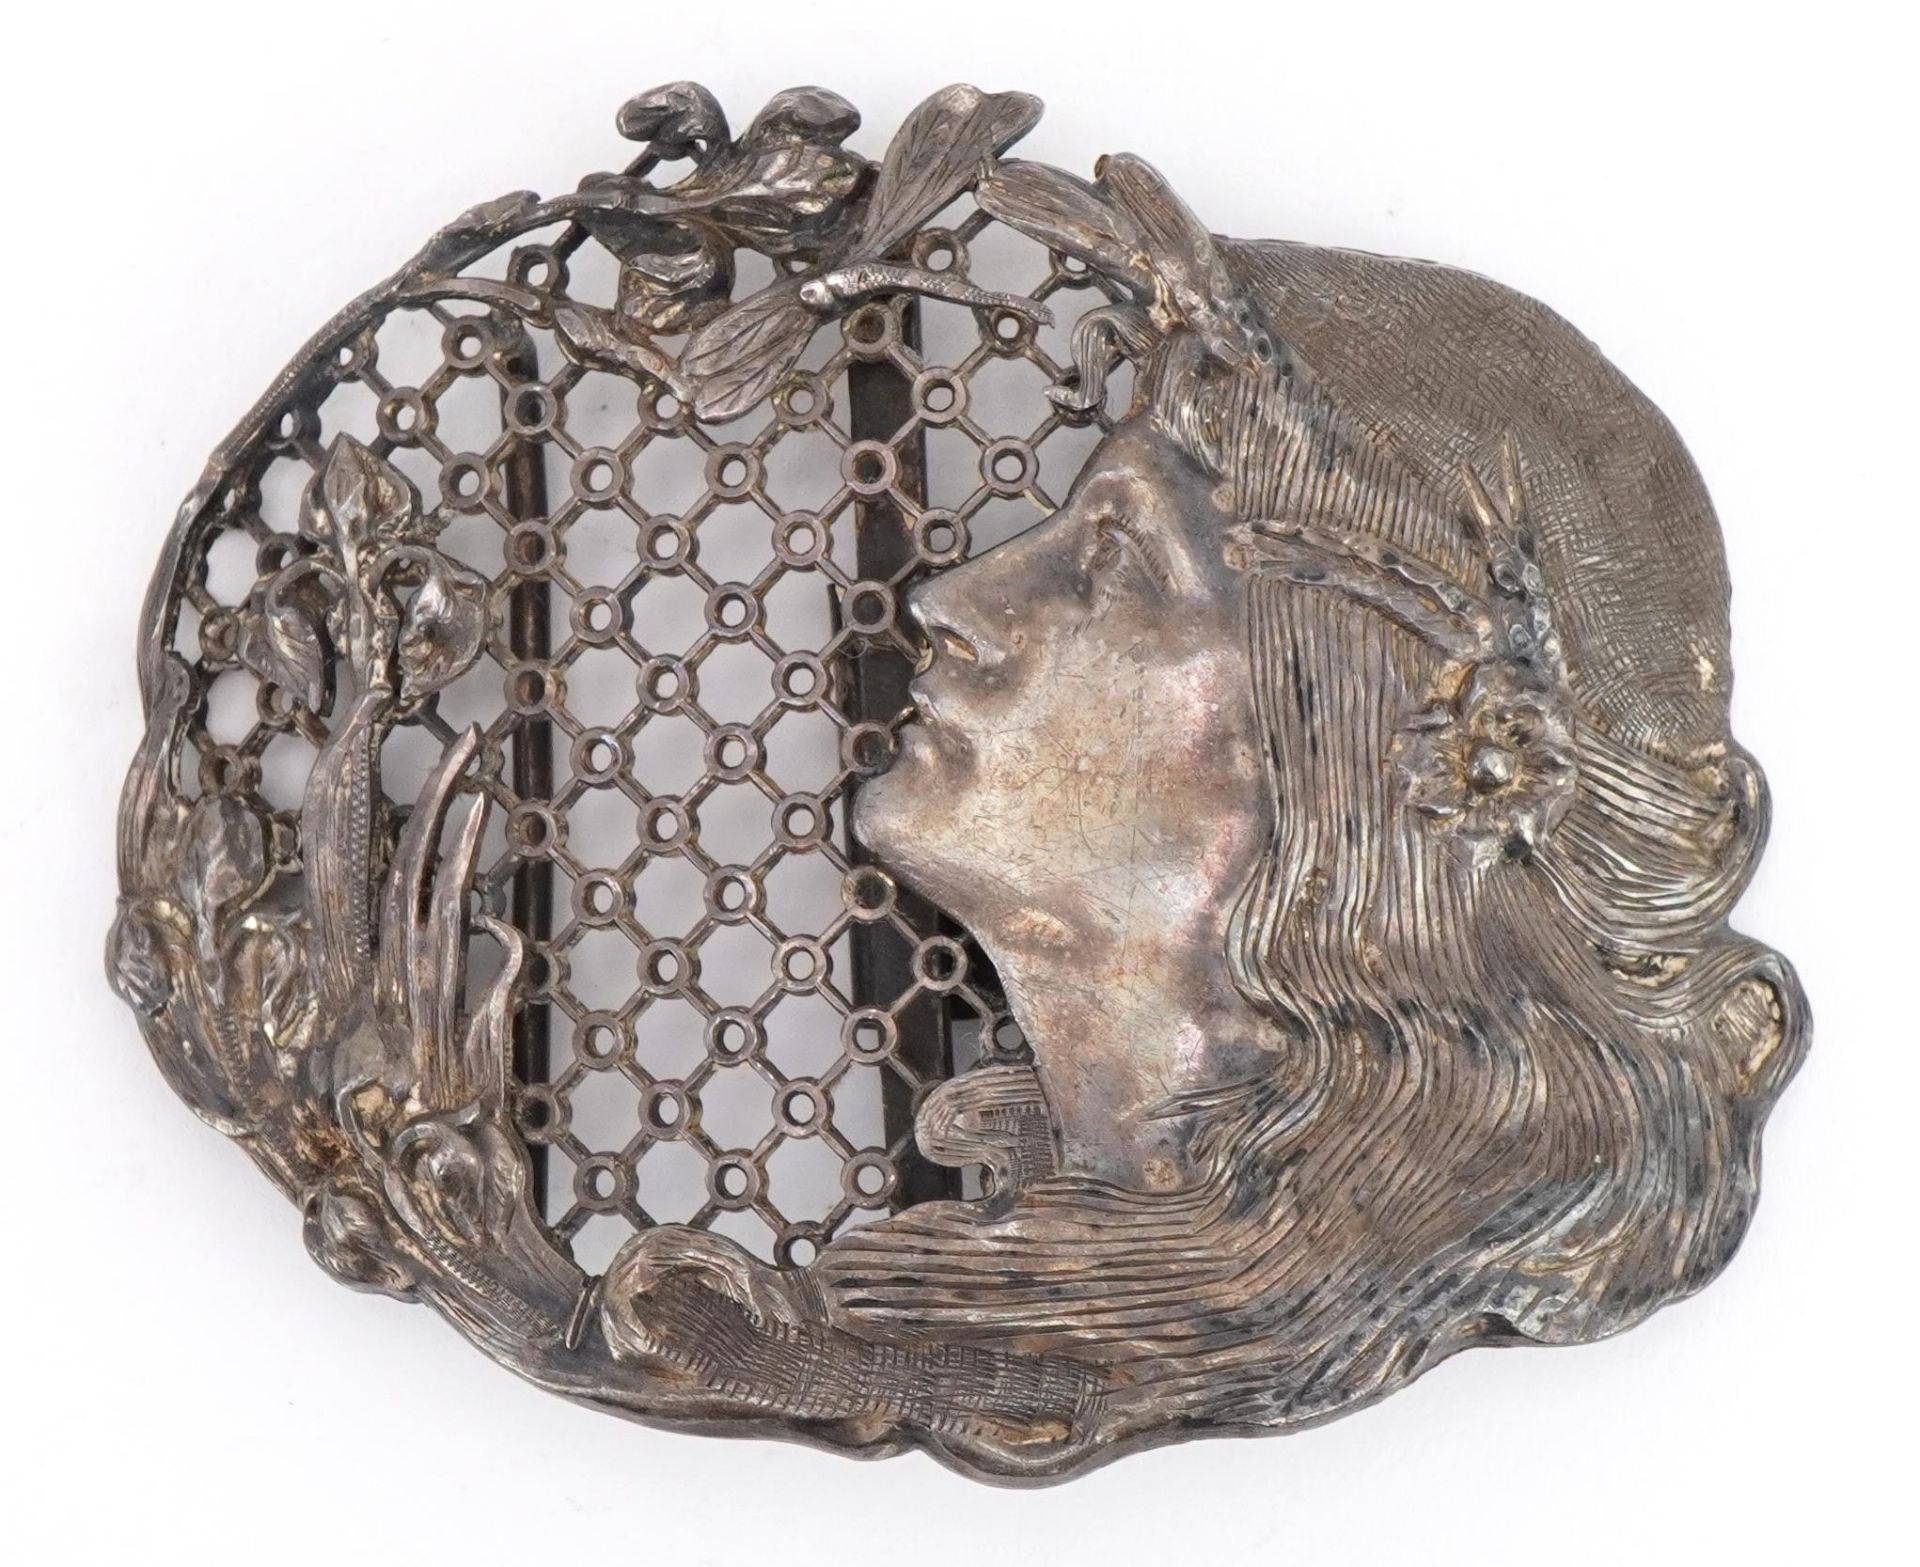 Arthur Johnson Smith, Art Nouveau silver buckle decorated in relief with maiden's head, dragonfly